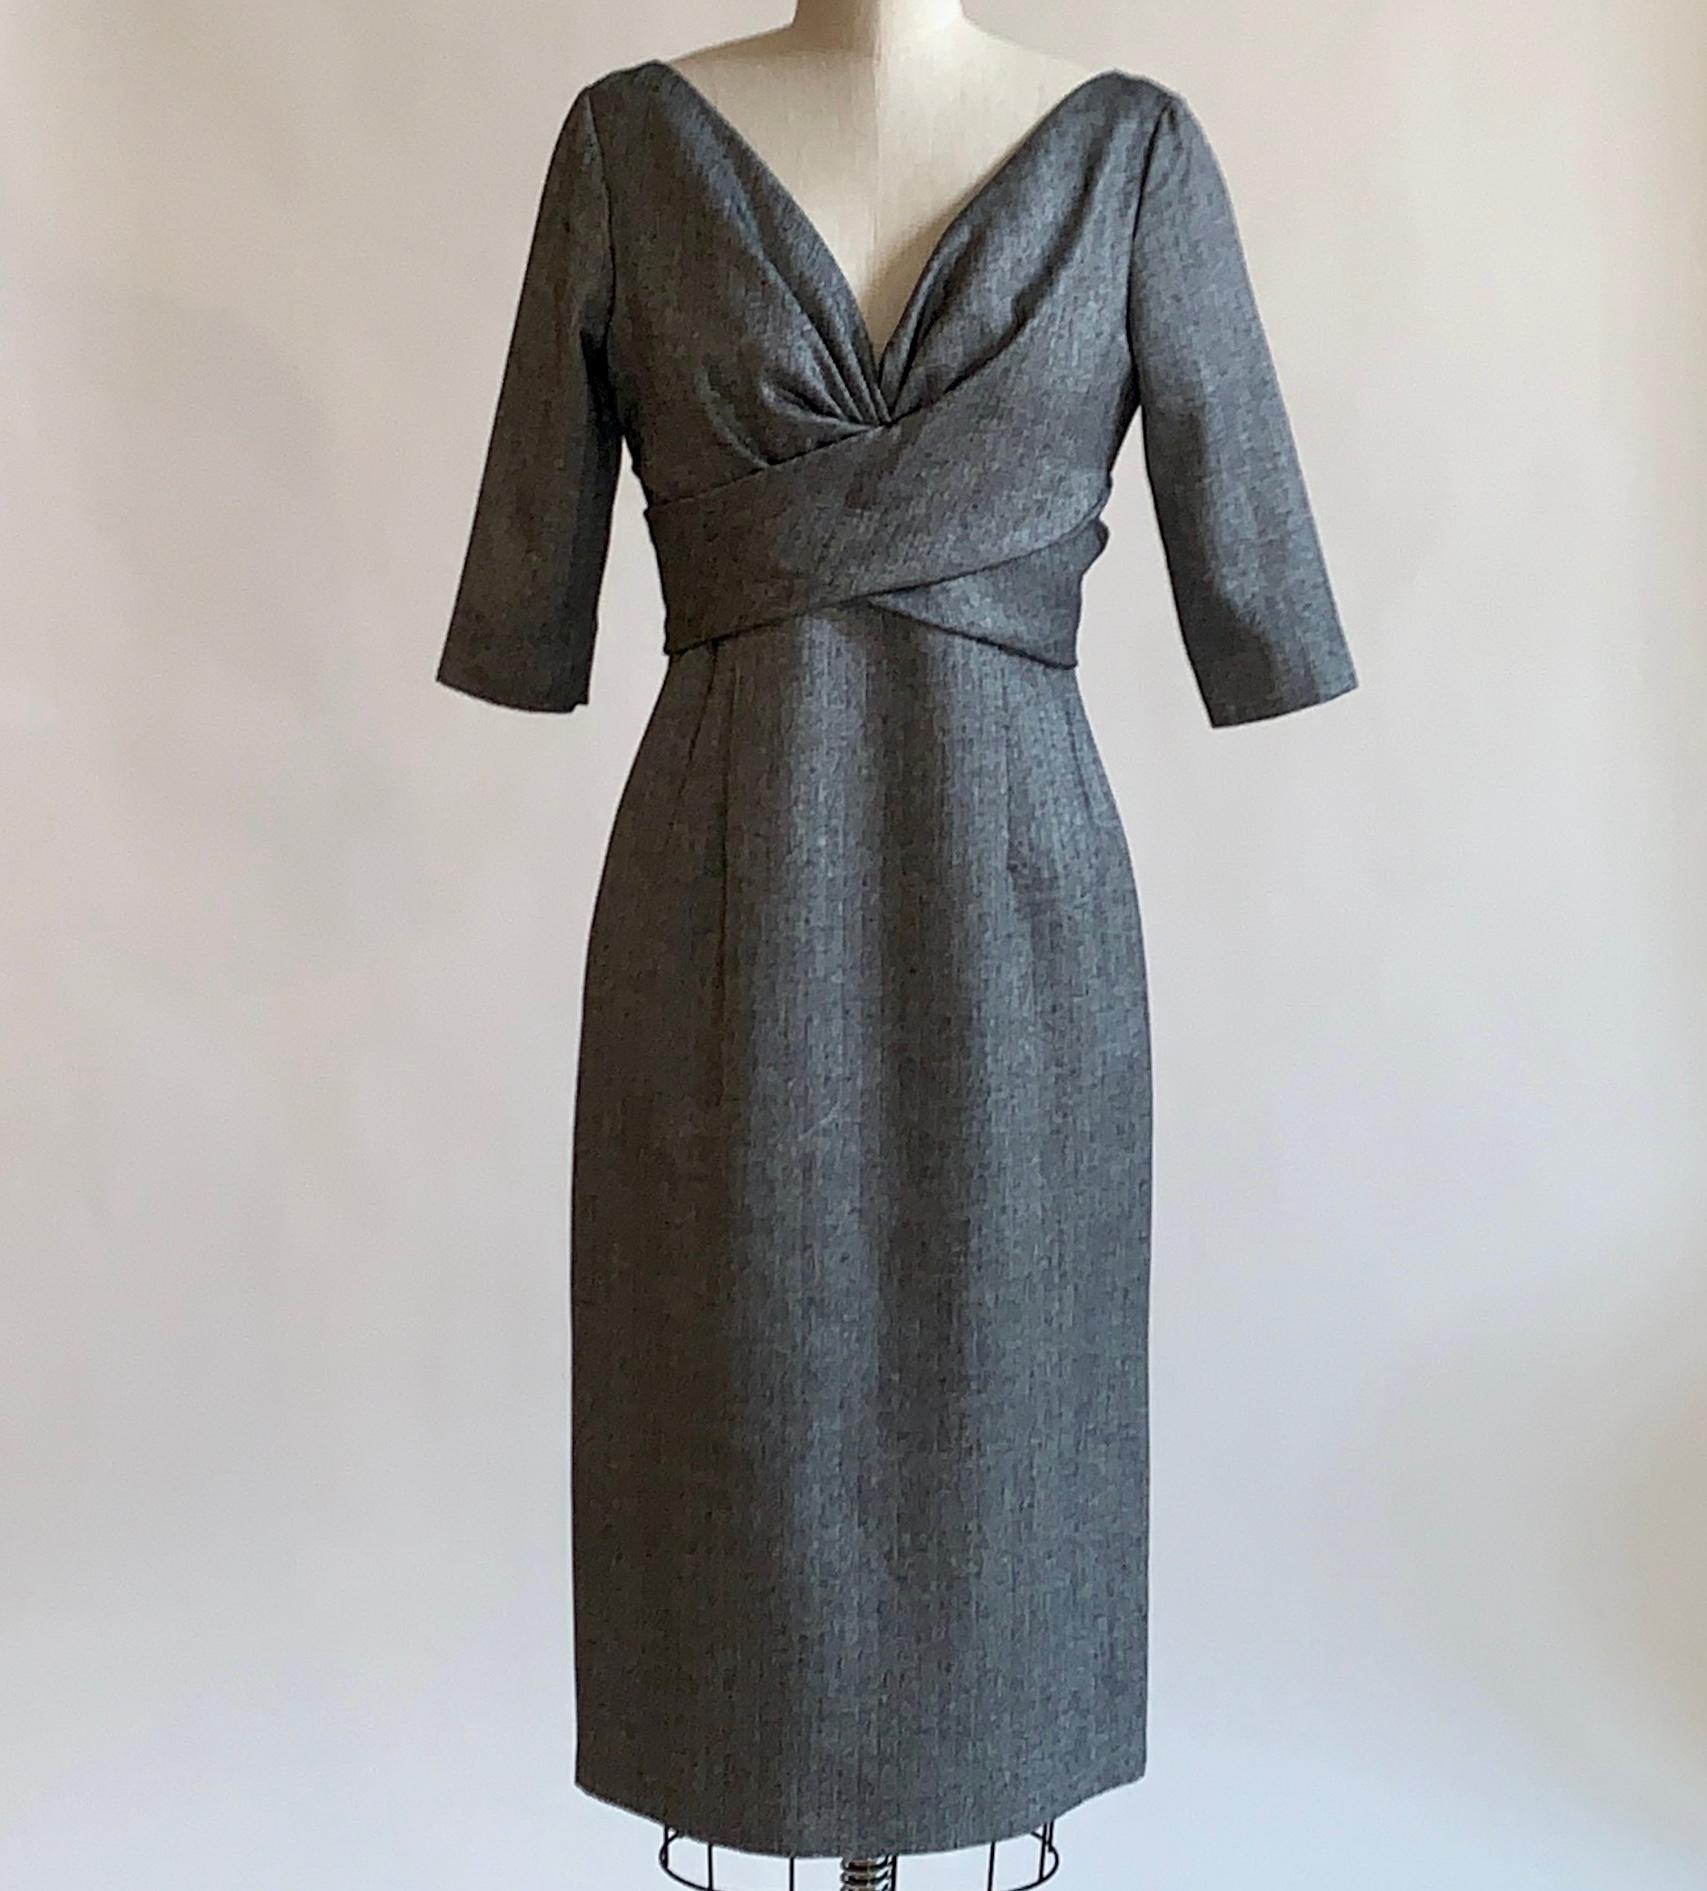 Alexander McQueen 2008 grey and black herringbone pencil dress with mid length sleeve, v neck, and  wrap-style detail at bust. Back zip and hook and loop closure.

50% virgin fleece wool, 45% bamboo, 5% cashmere.
Top lined in 50% virgin fleece wool,